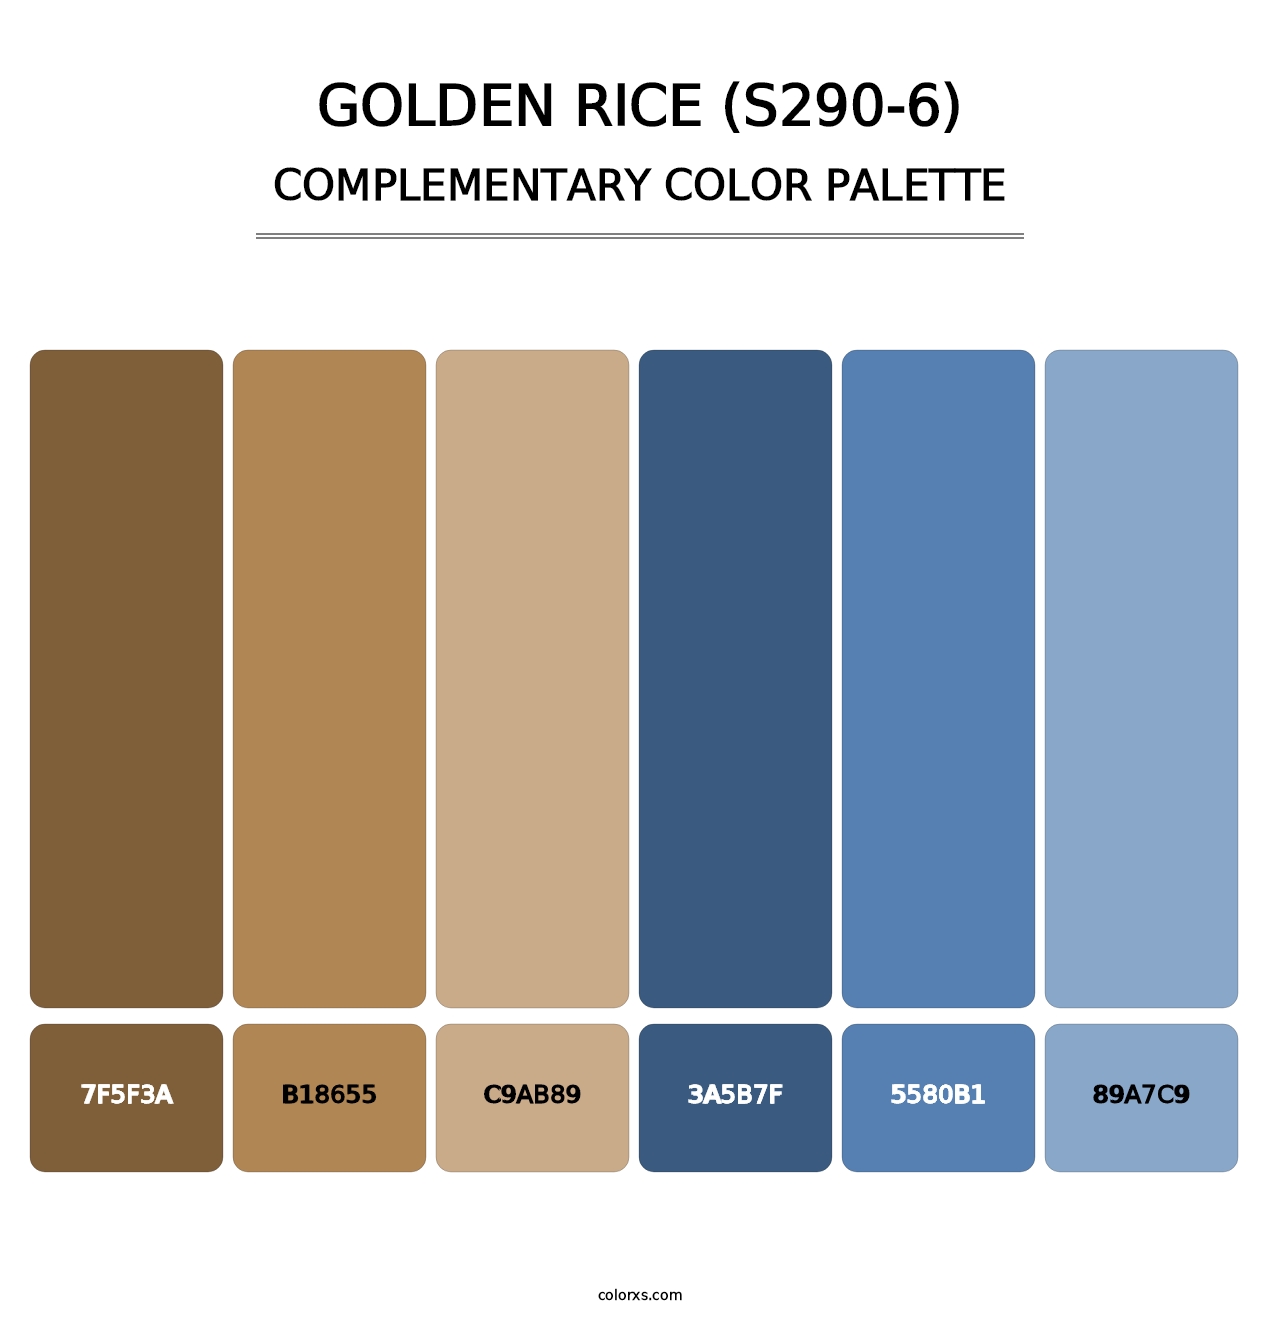 Golden Rice (S290-6) - Complementary Color Palette